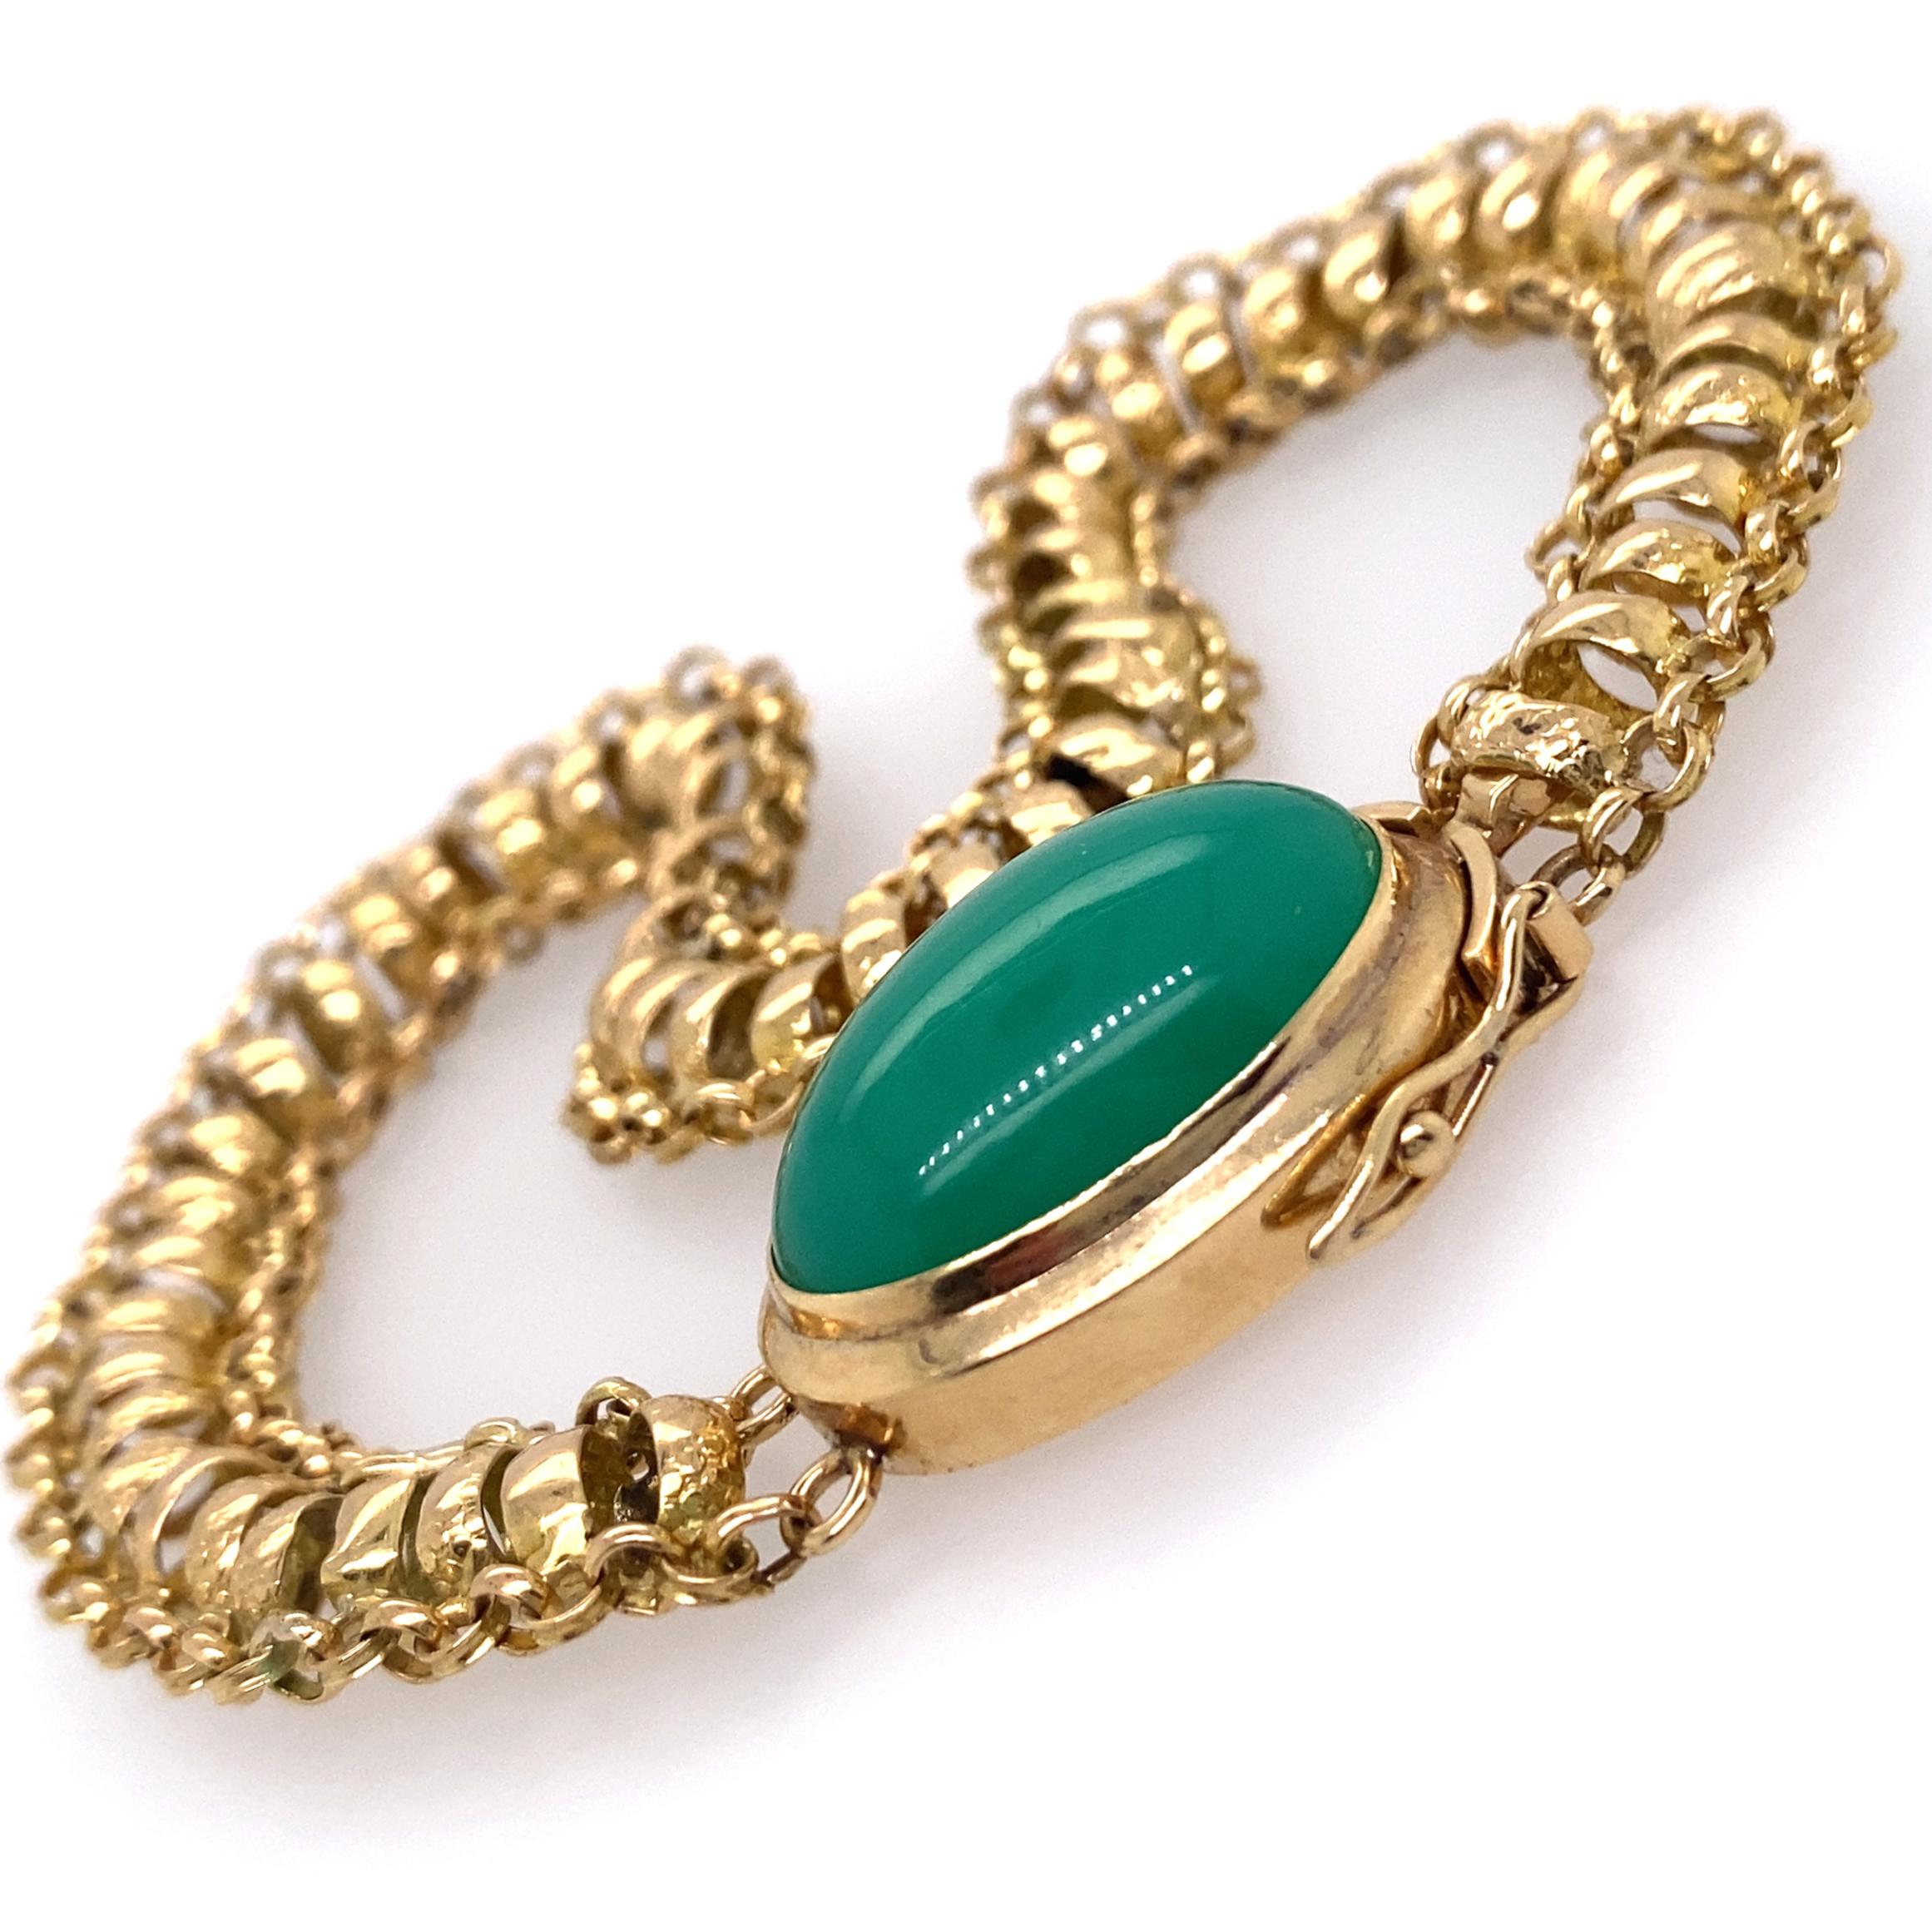 This unusual chain is a segment from an 18 karat gold 40